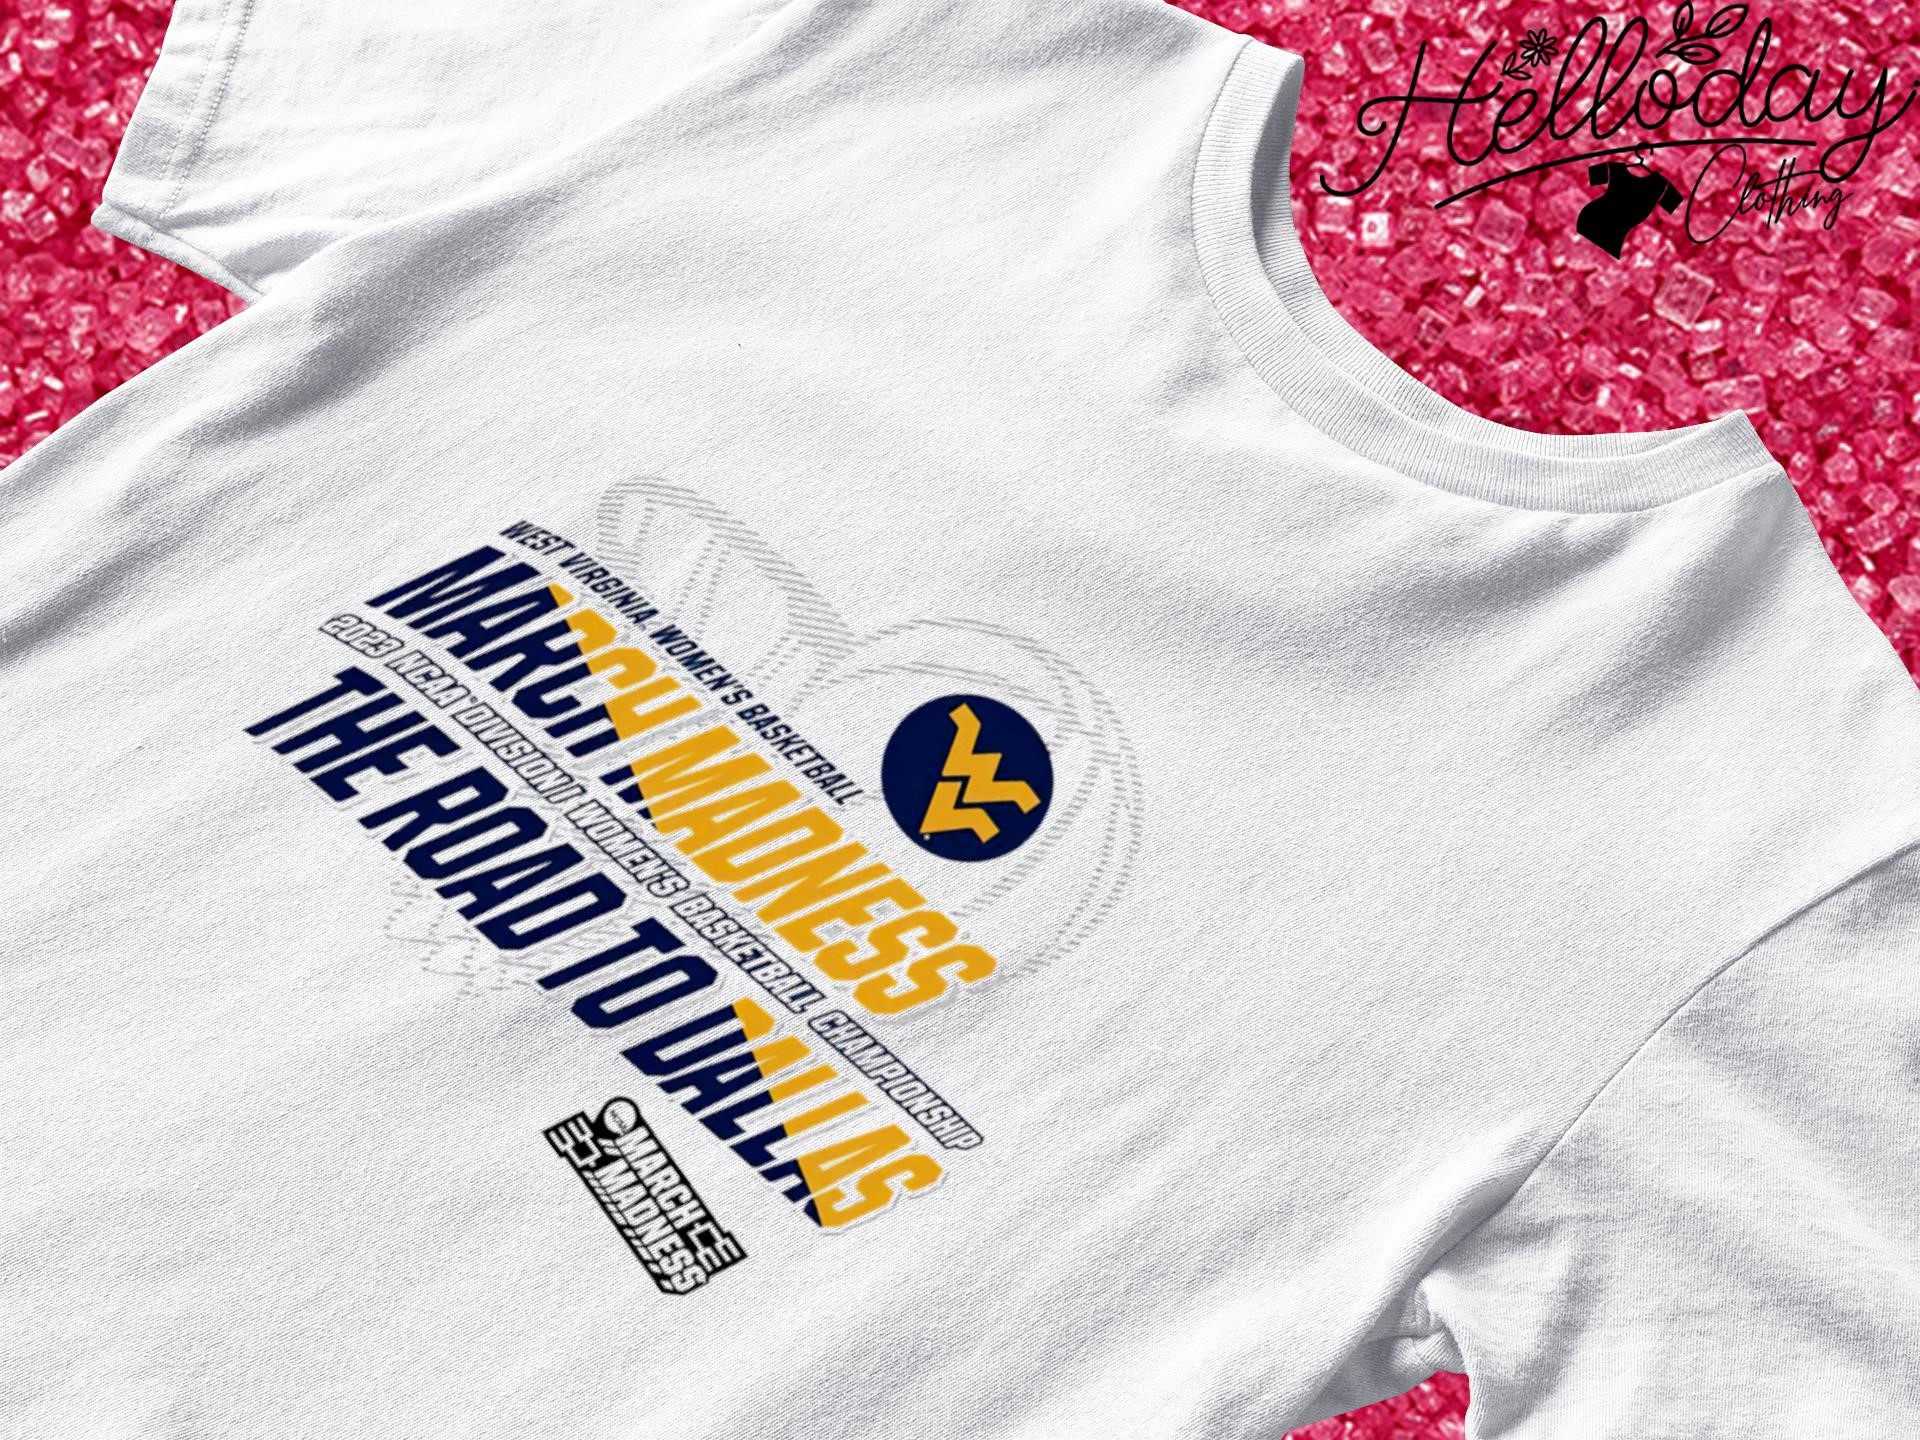 West Virginia Women's Basketball March Madness 2023 NCAA Division I Women's Basketball Championship shirt